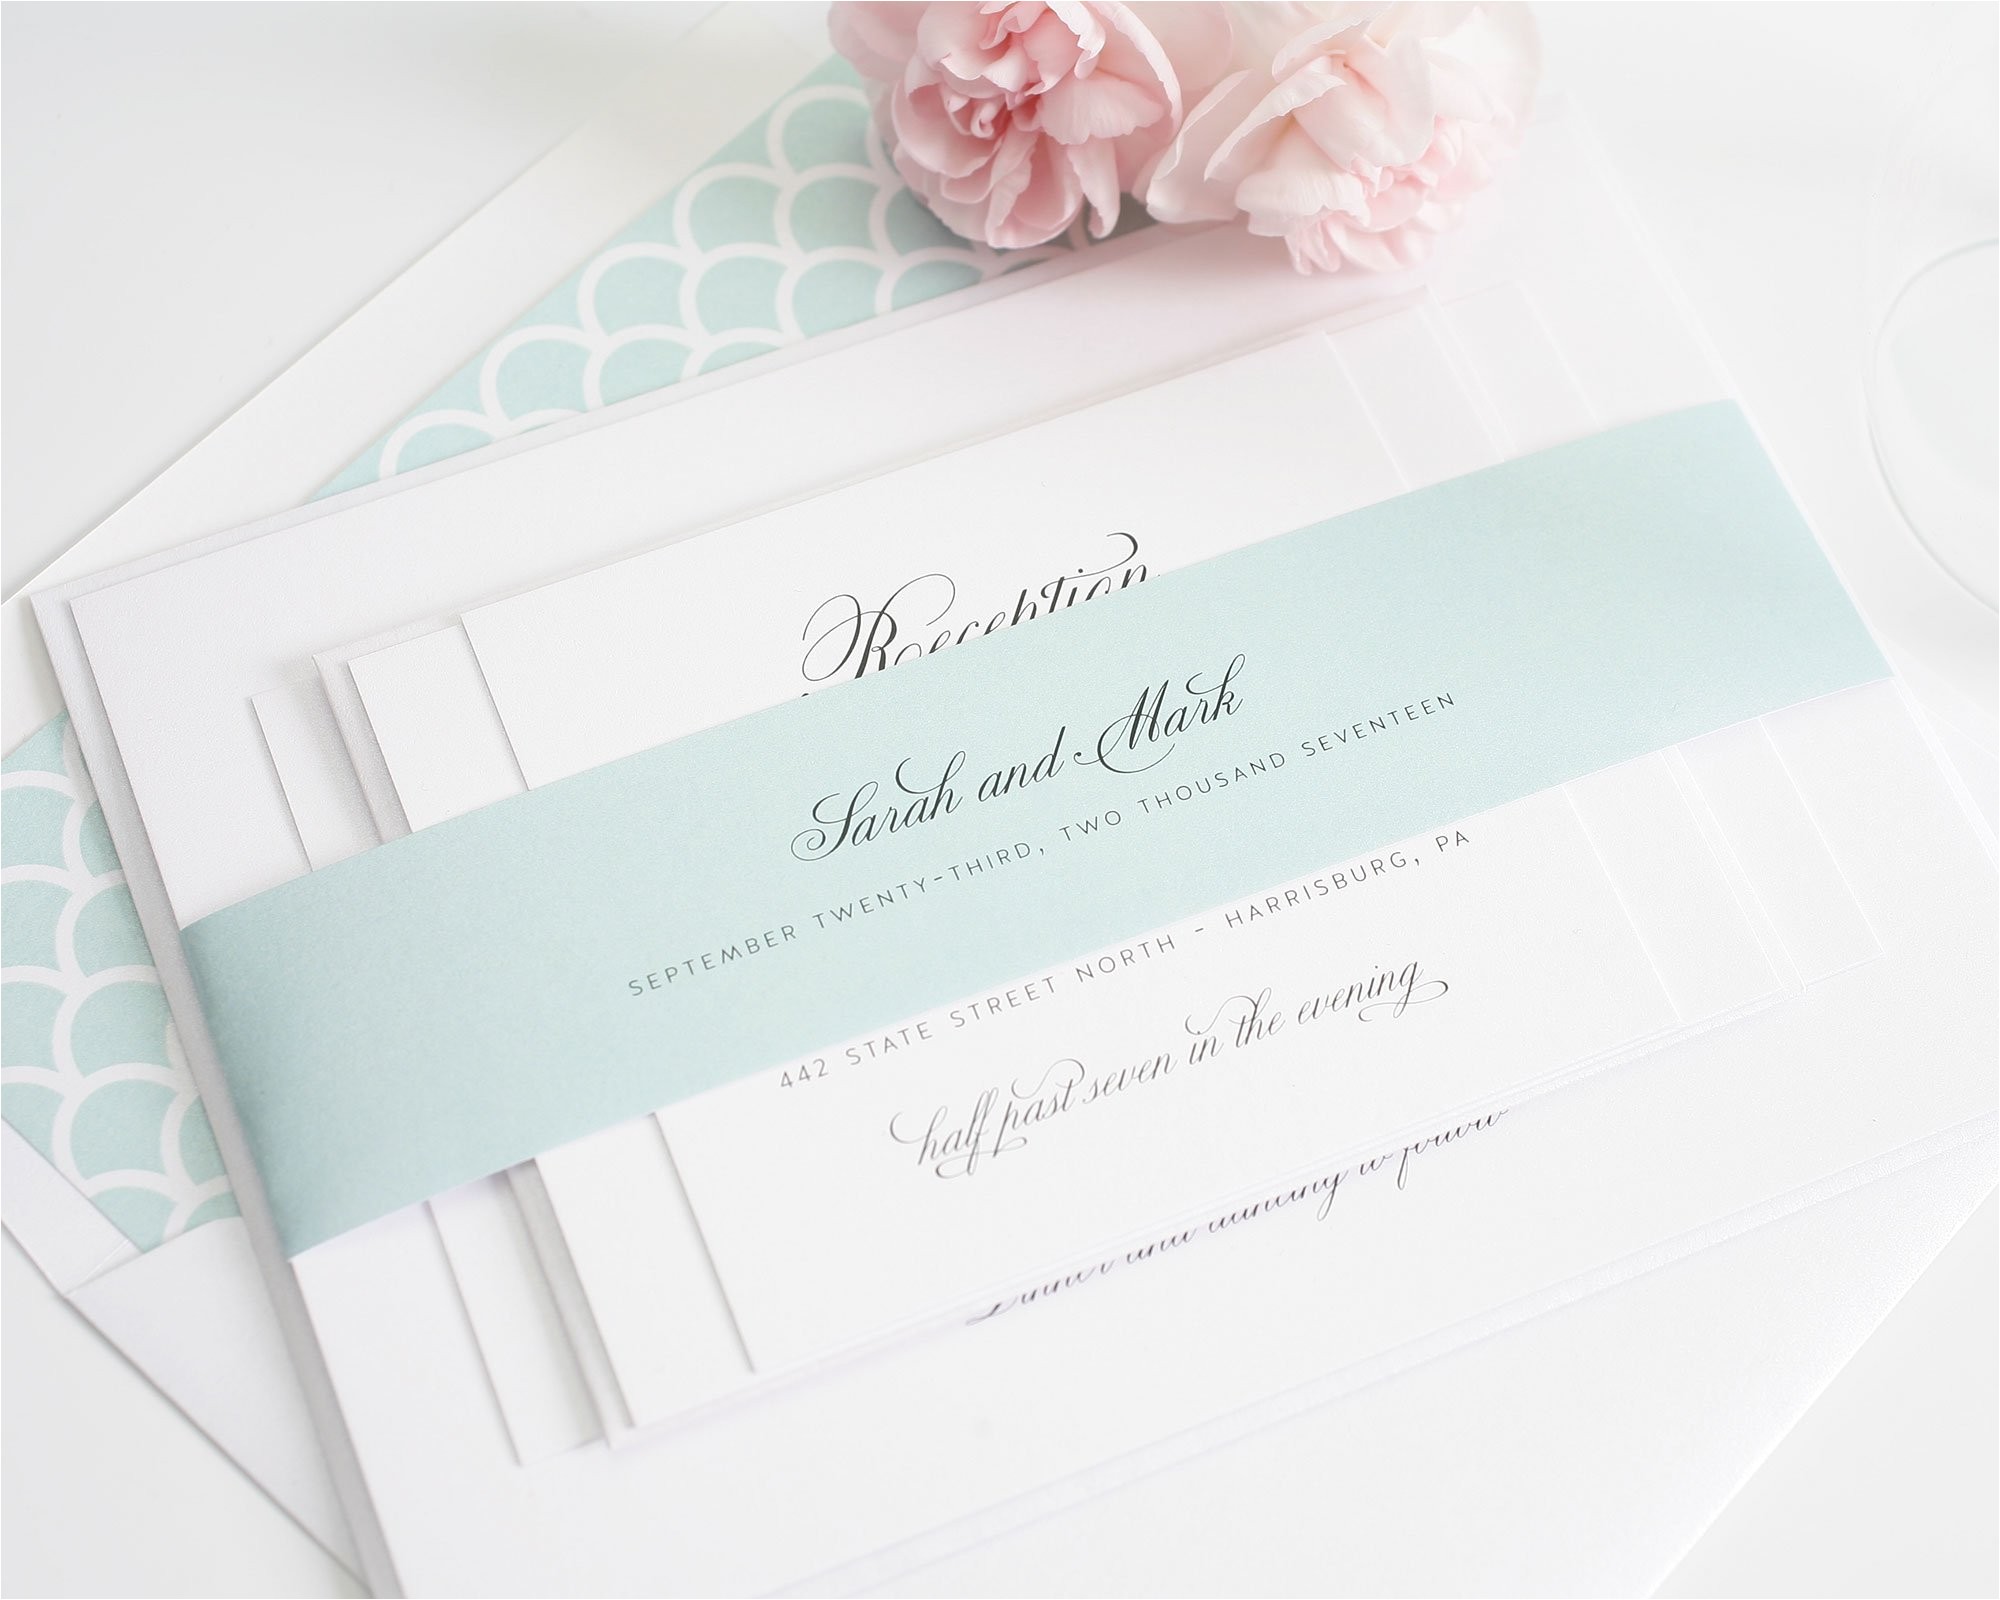 2015 wedding invitations a new collection from shine wedding invitations